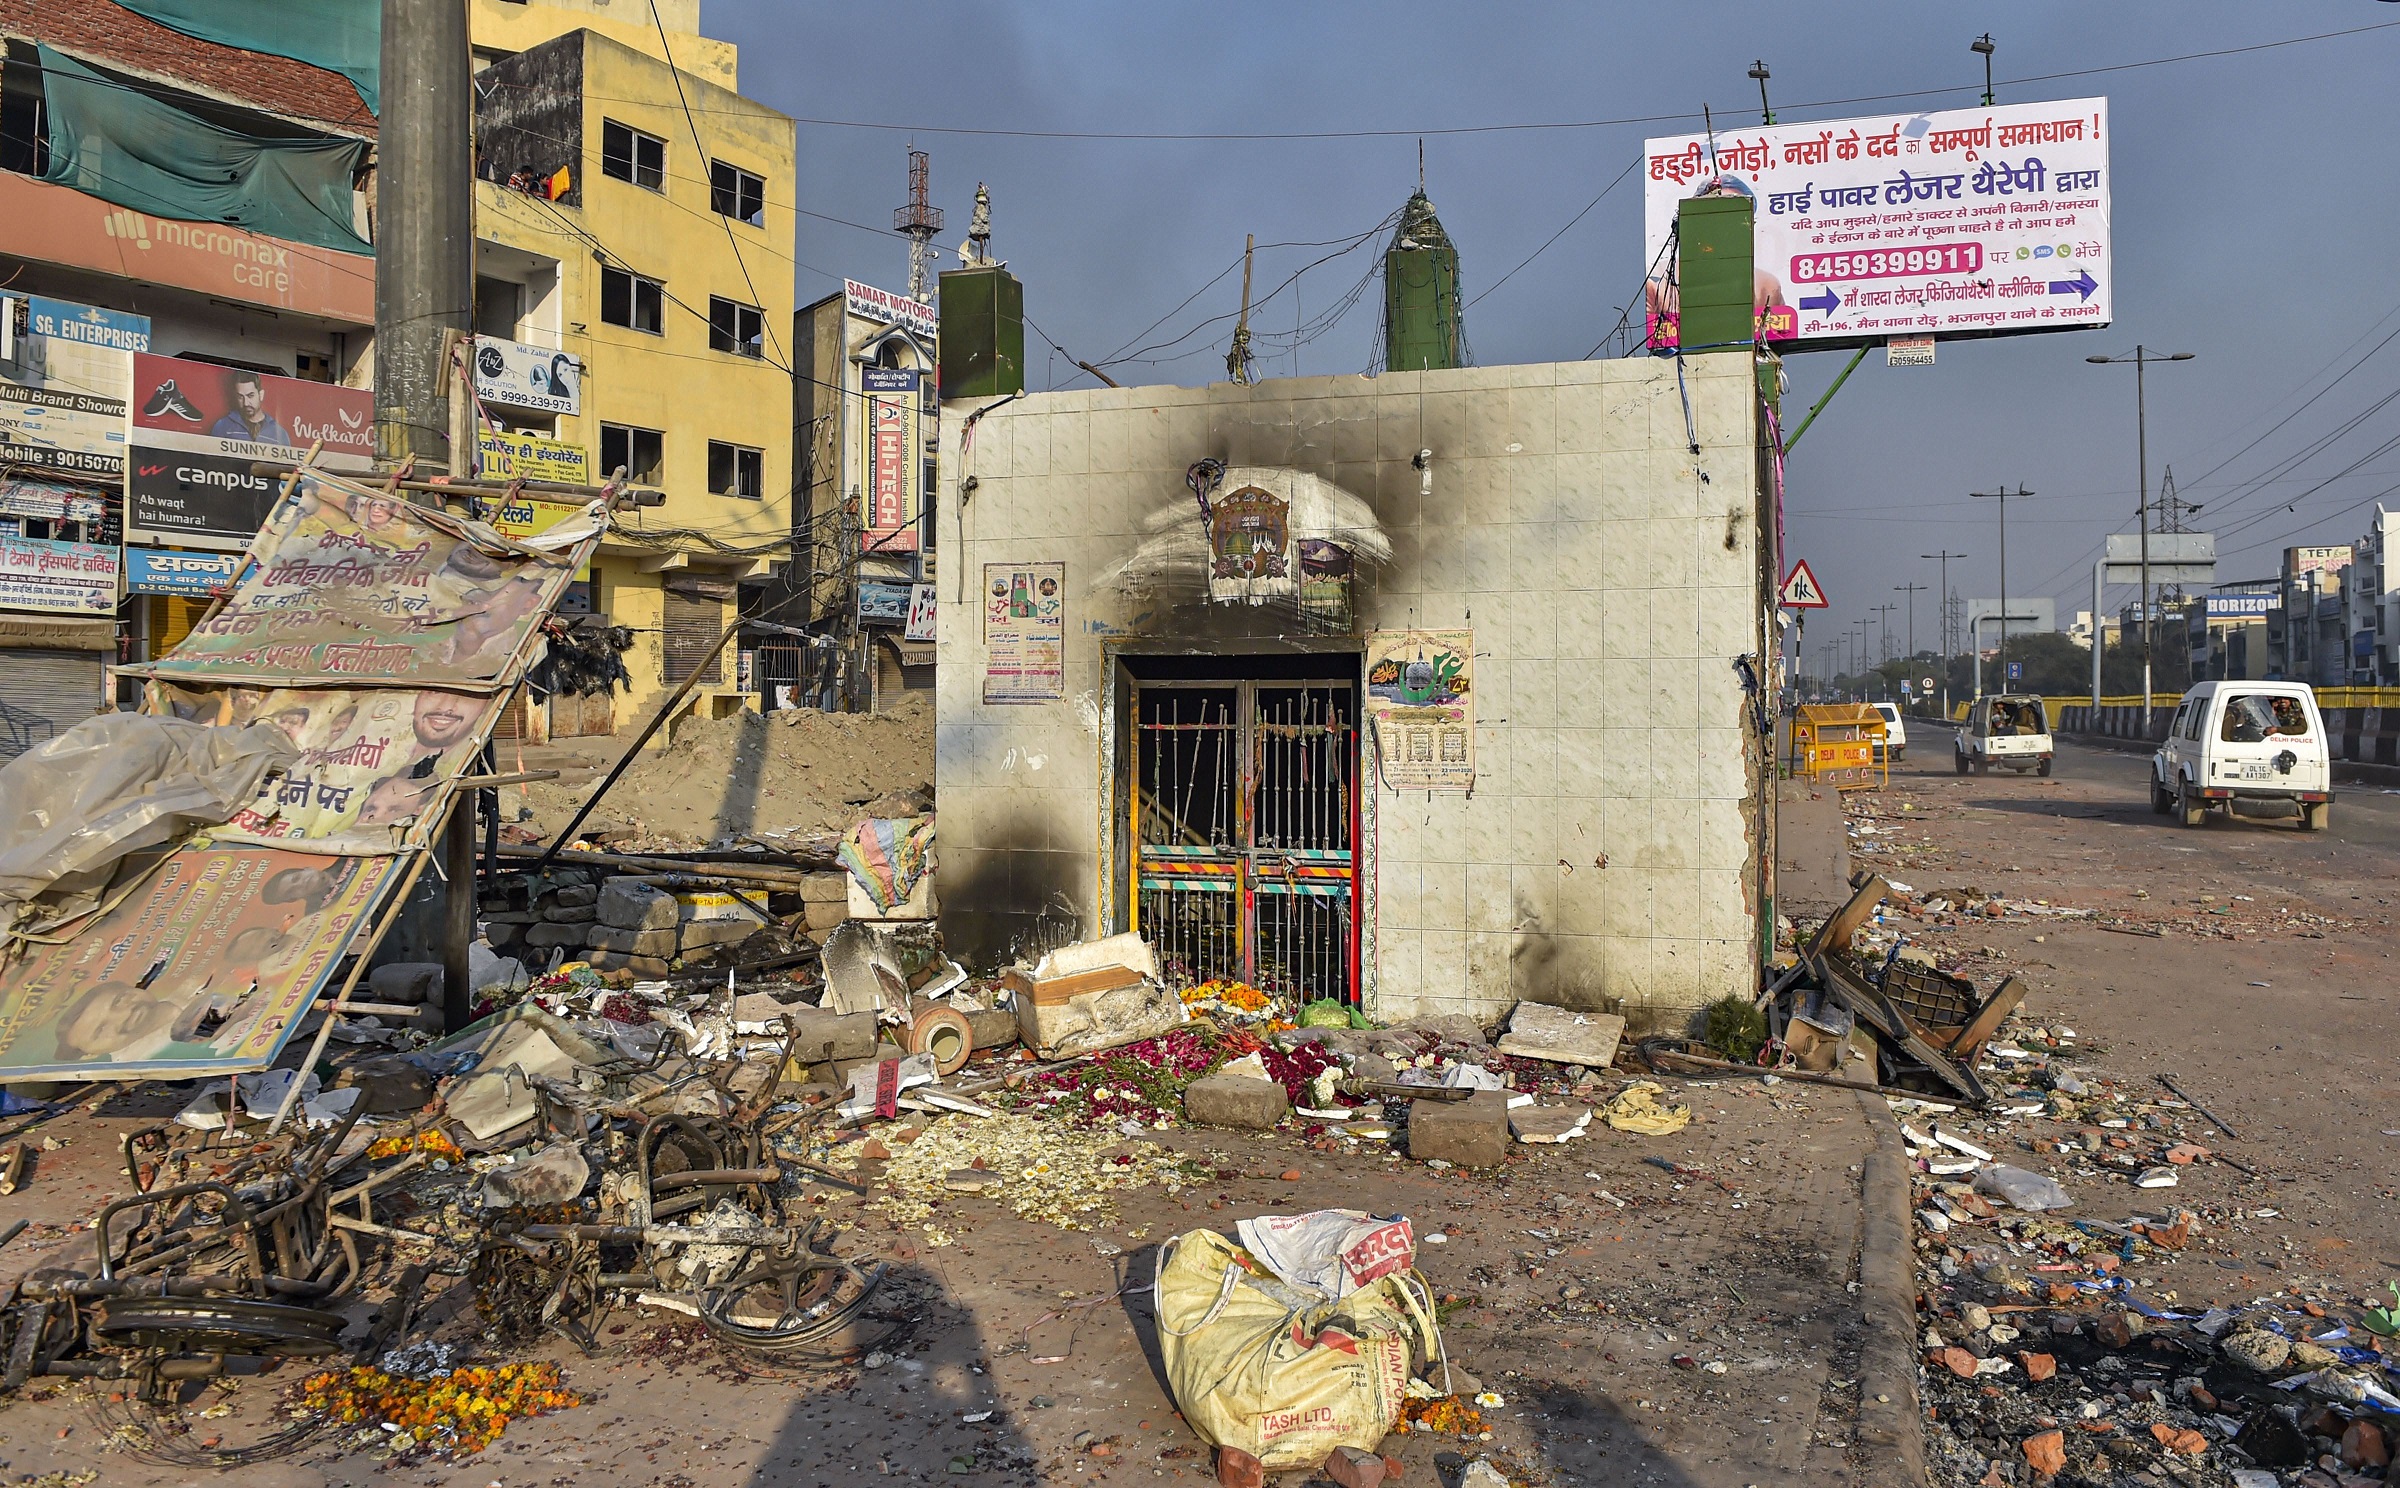 Pro-CAA mob admits to burning down mosque in Delhi